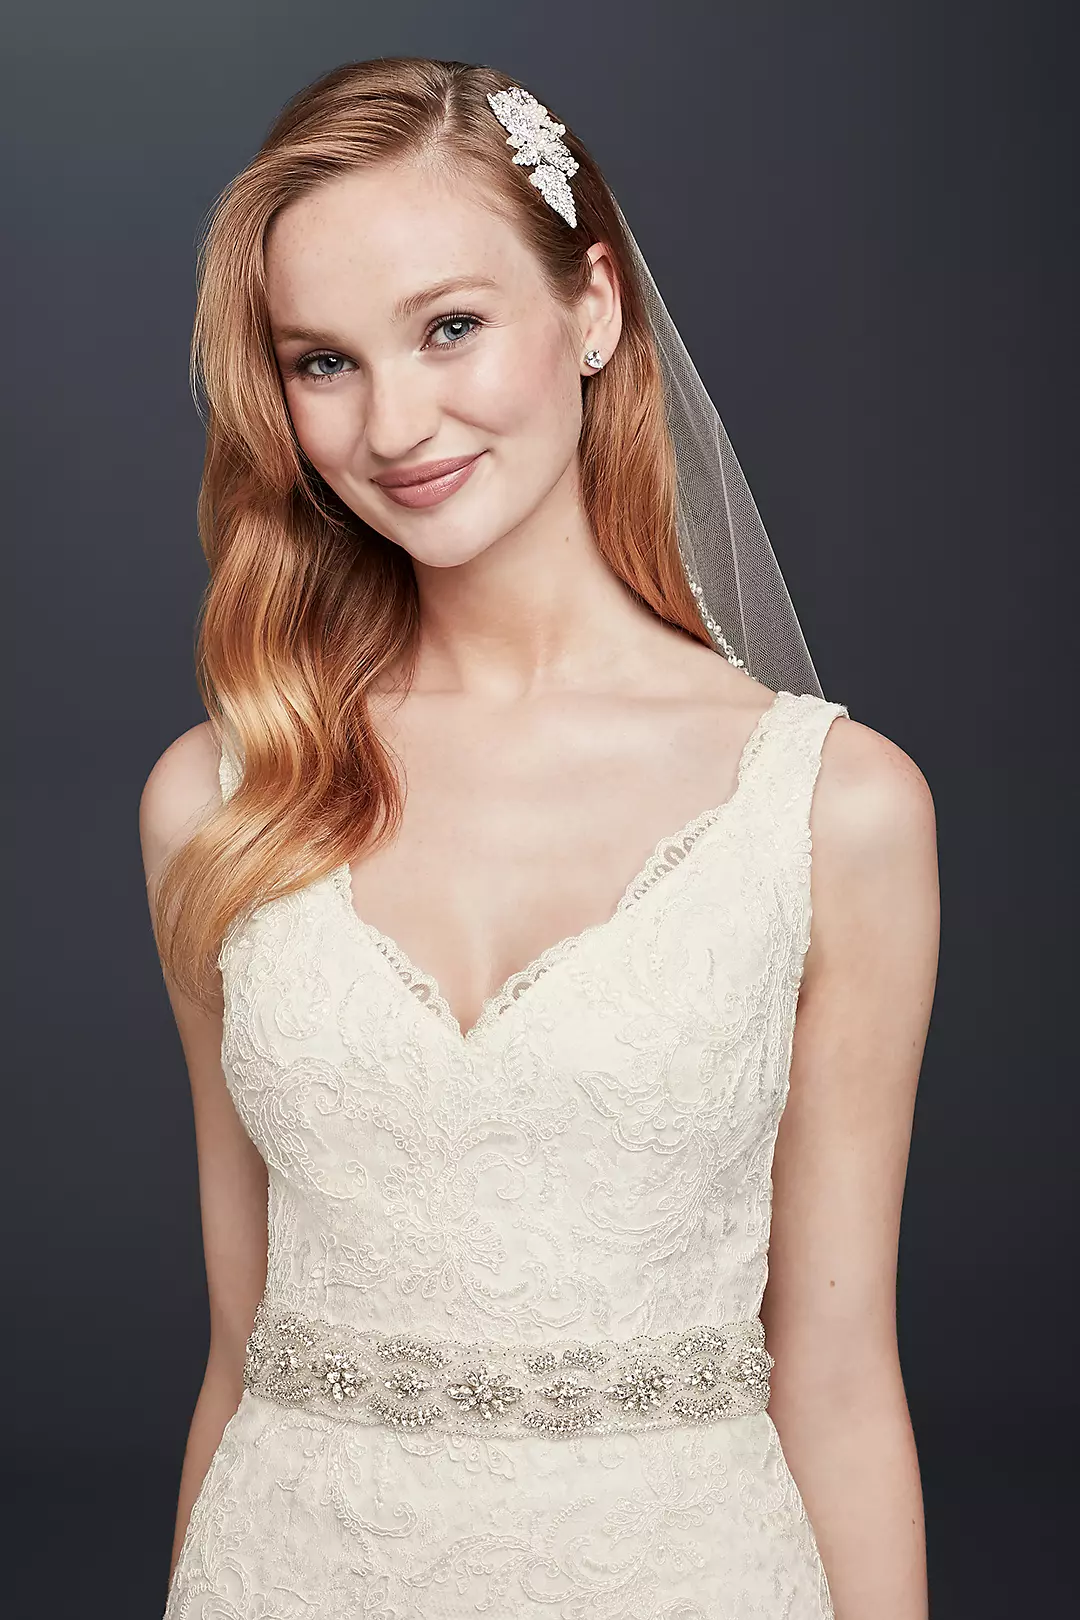 As-Is Lace Scalloped Neck Mermaid Wedding Dress Image 3